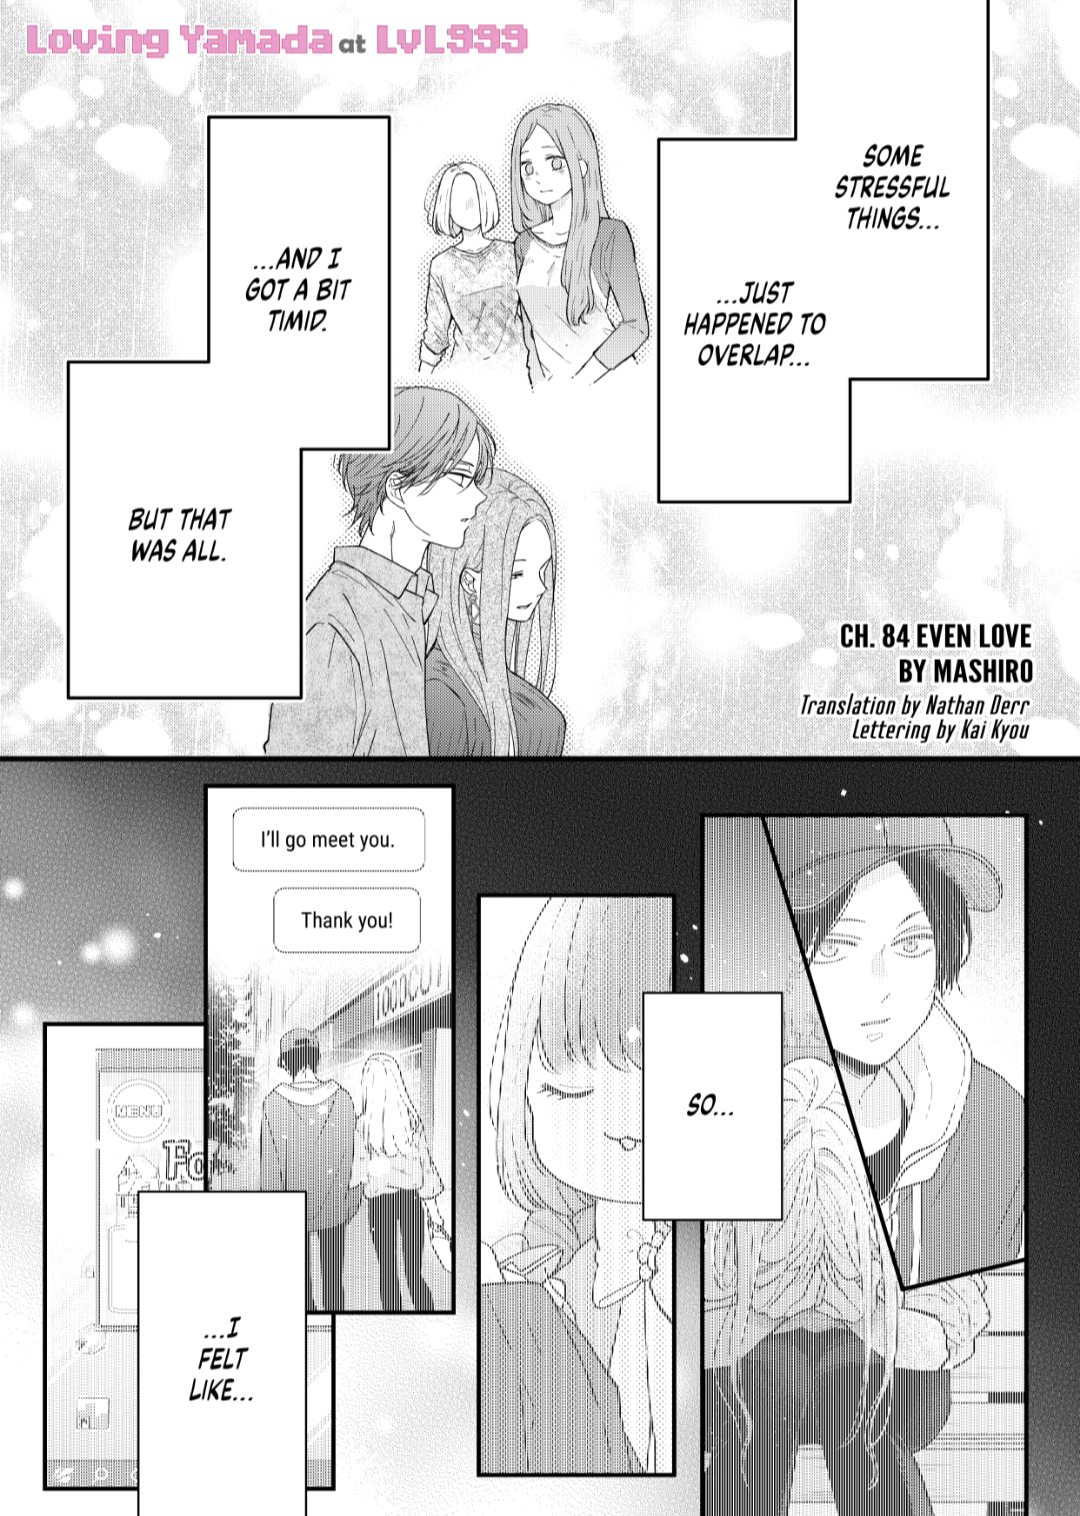 Will there be My Love Story with Yamada-kun at Lv999 episode 14? Explained